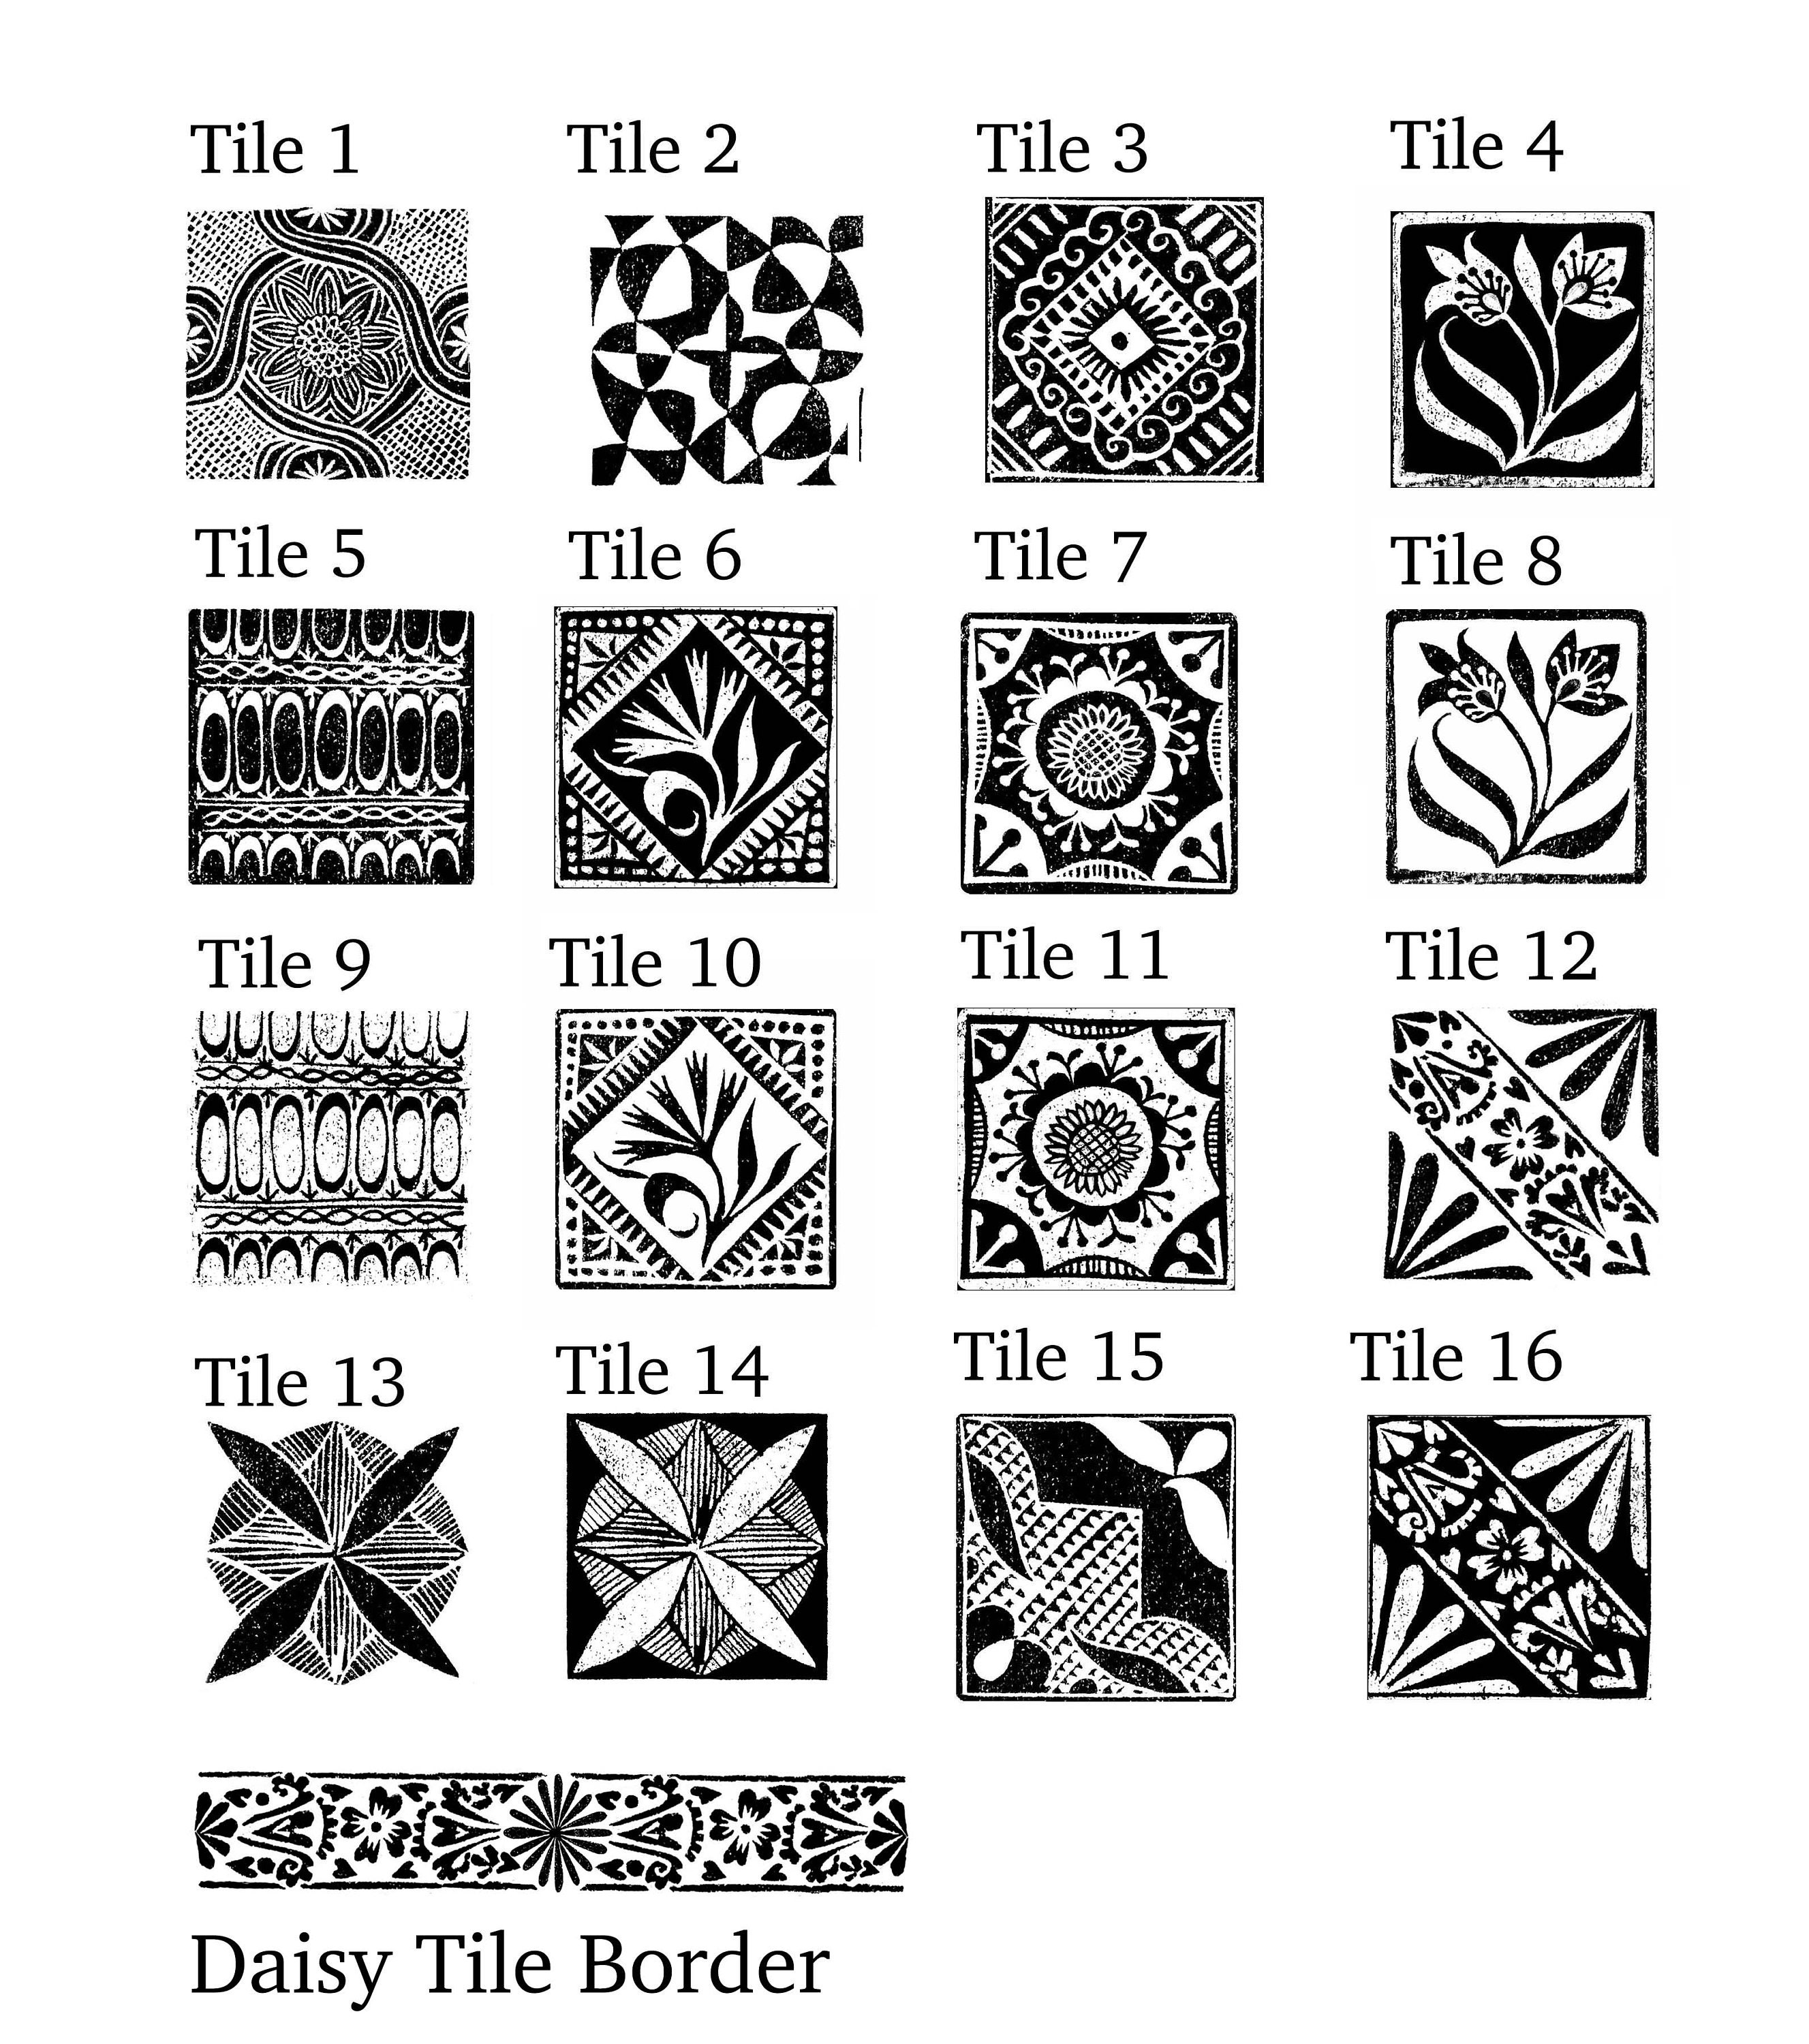 Border and Texture Rubber Stamps for Card Making 